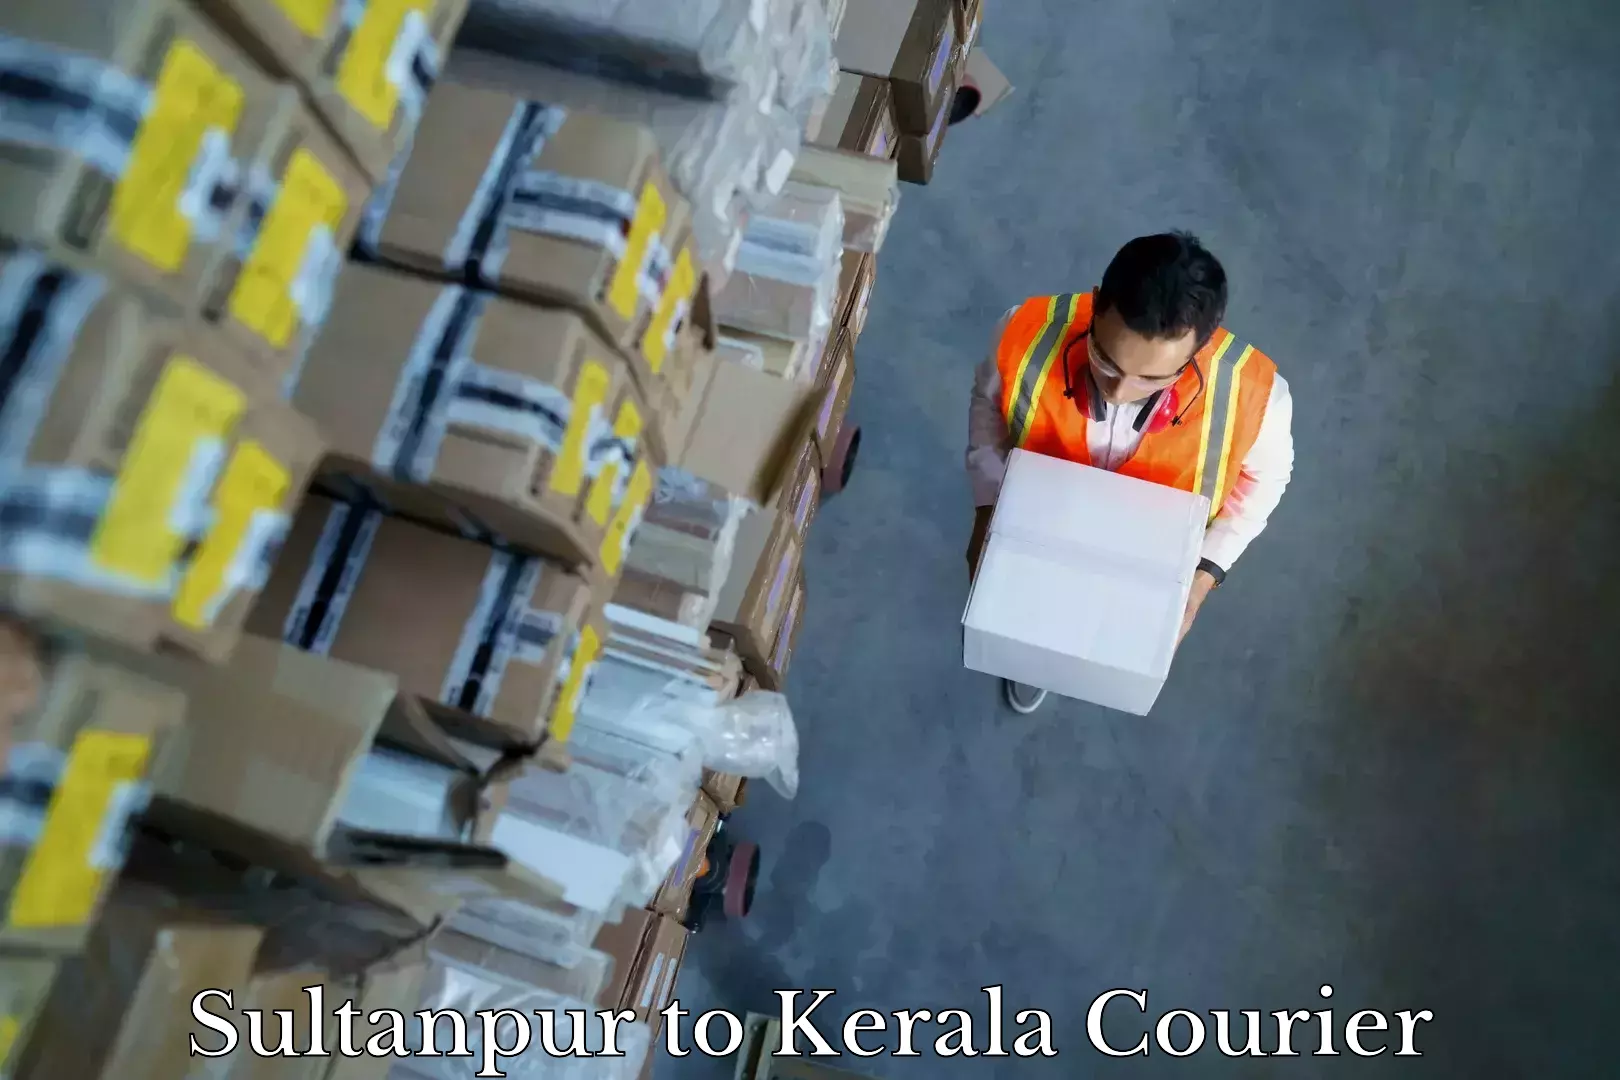 Hassle-free relocation in Sultanpur to Kerala